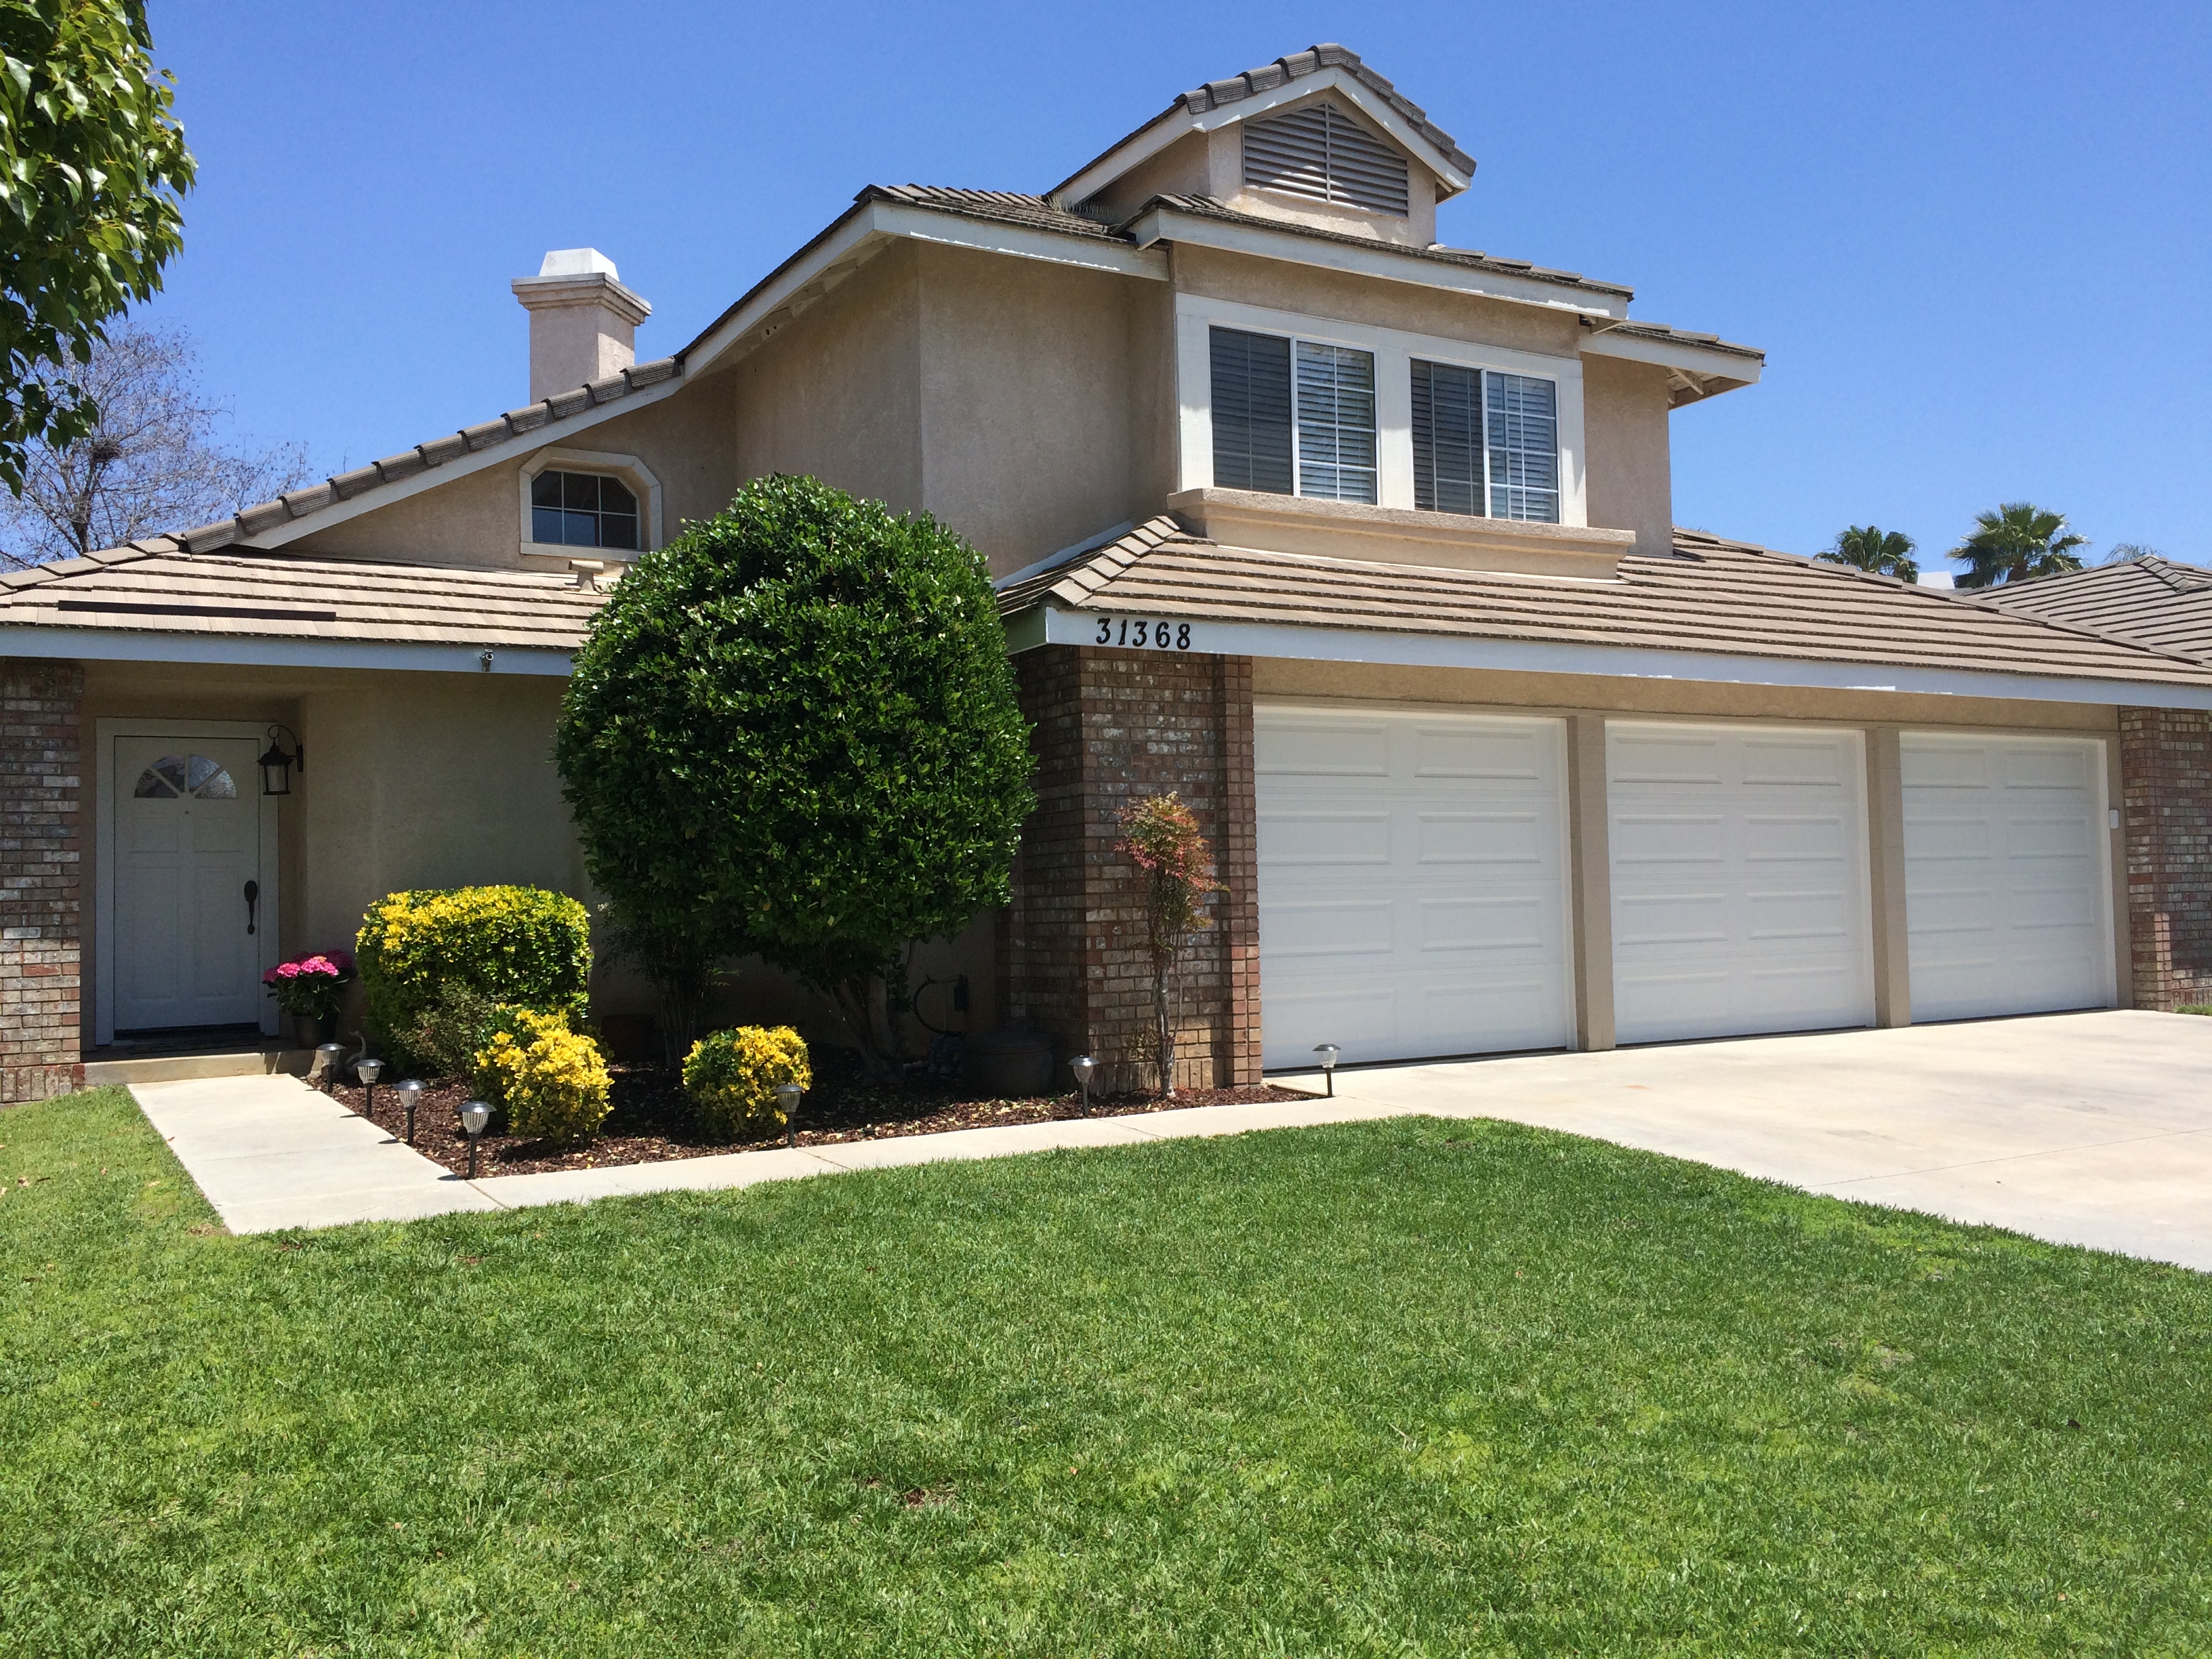 SOLD in 3 days!  Menifee CA  92584 - Great Neighborhood!  Call Denise Gentile, Realtor at Coldwell Banker Associated Brokers Realty if you would like the same professional results!  951-751-1311.